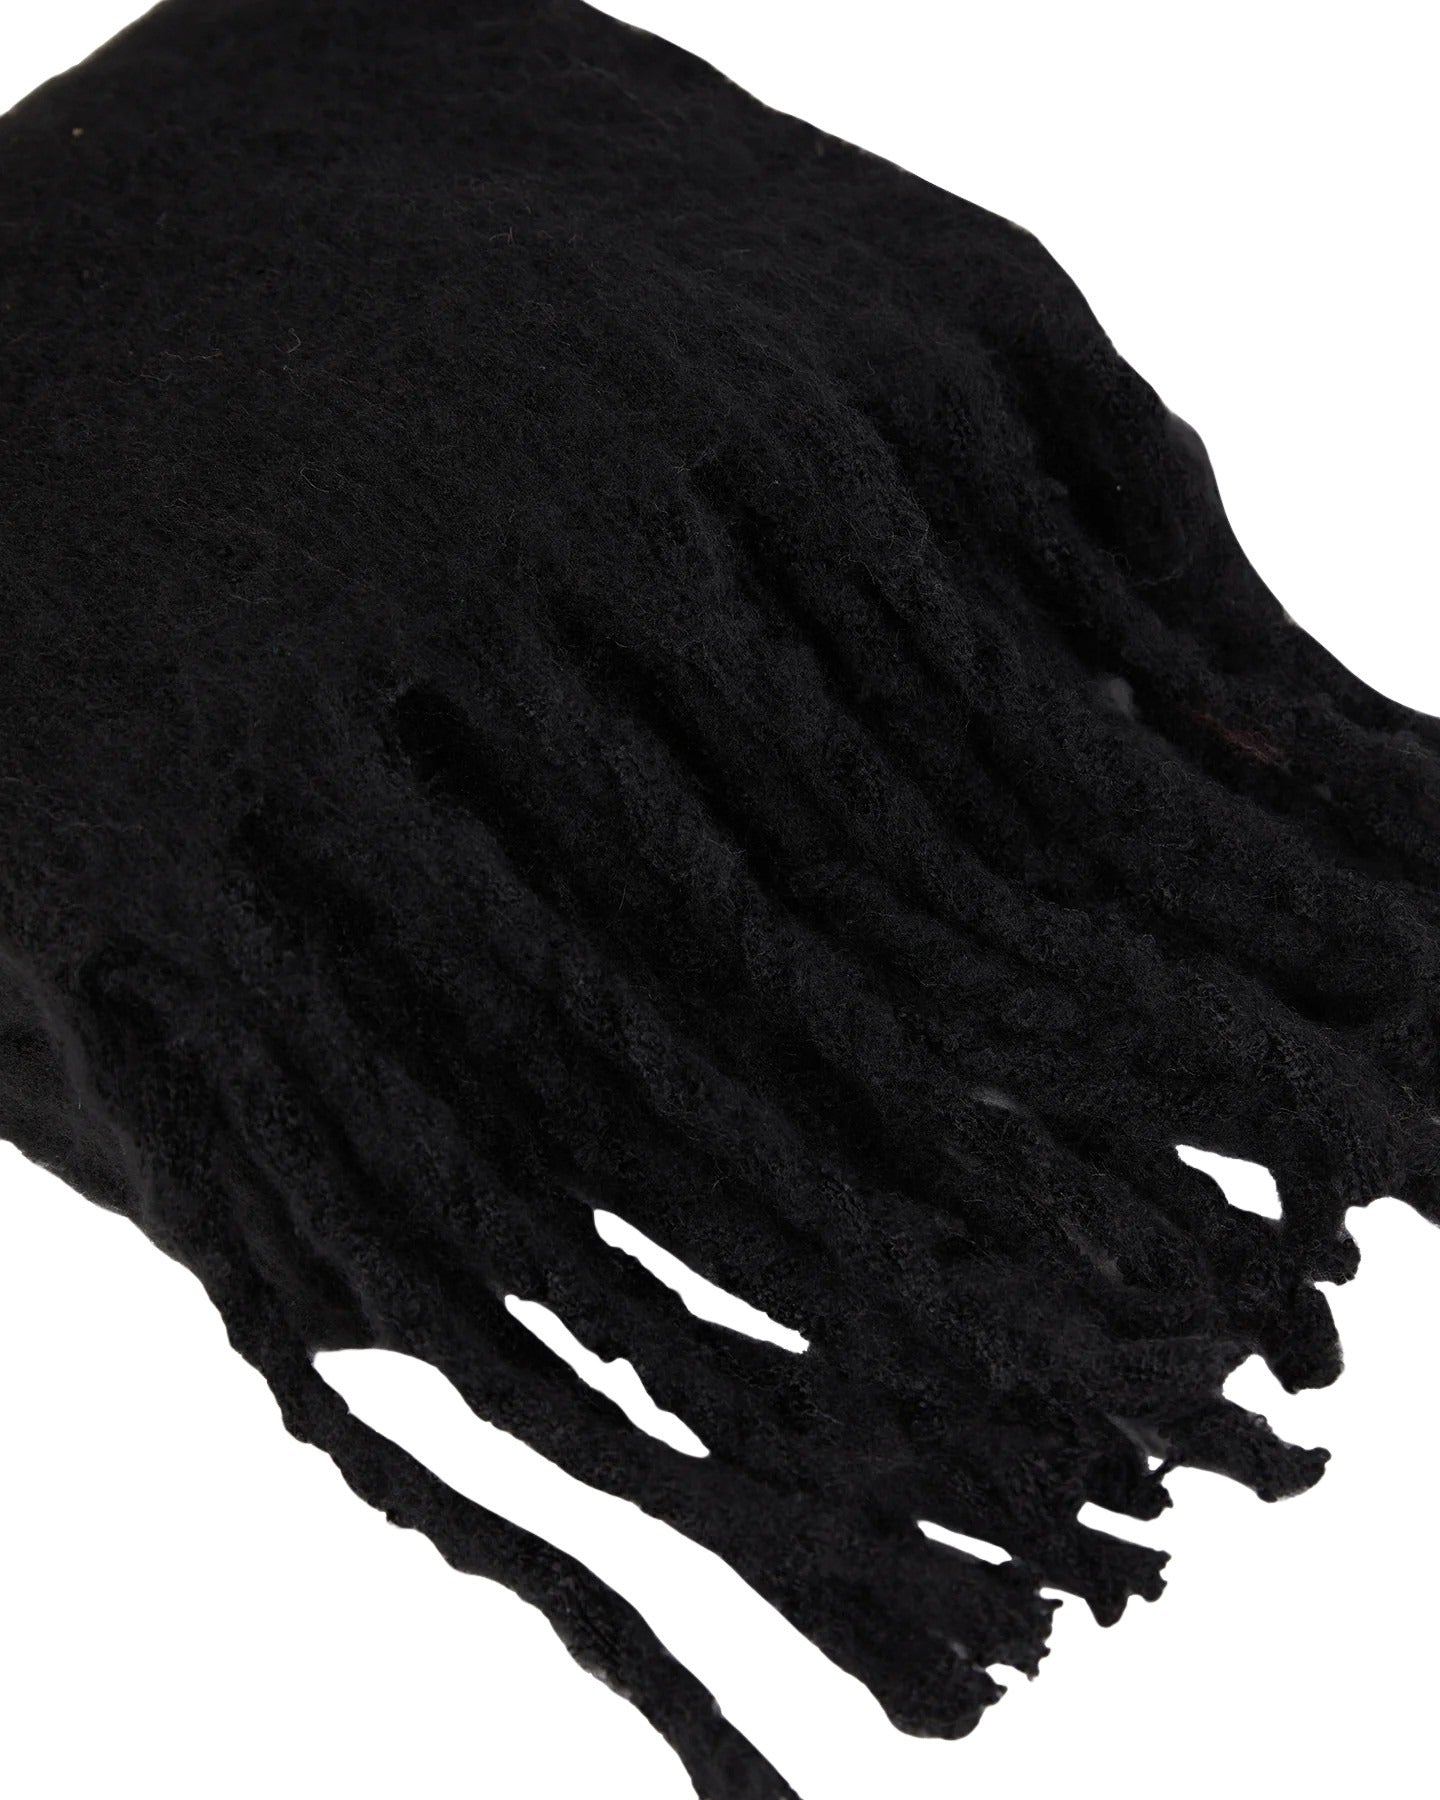 All About Eve - Hoxton Luxe Scarf - Black